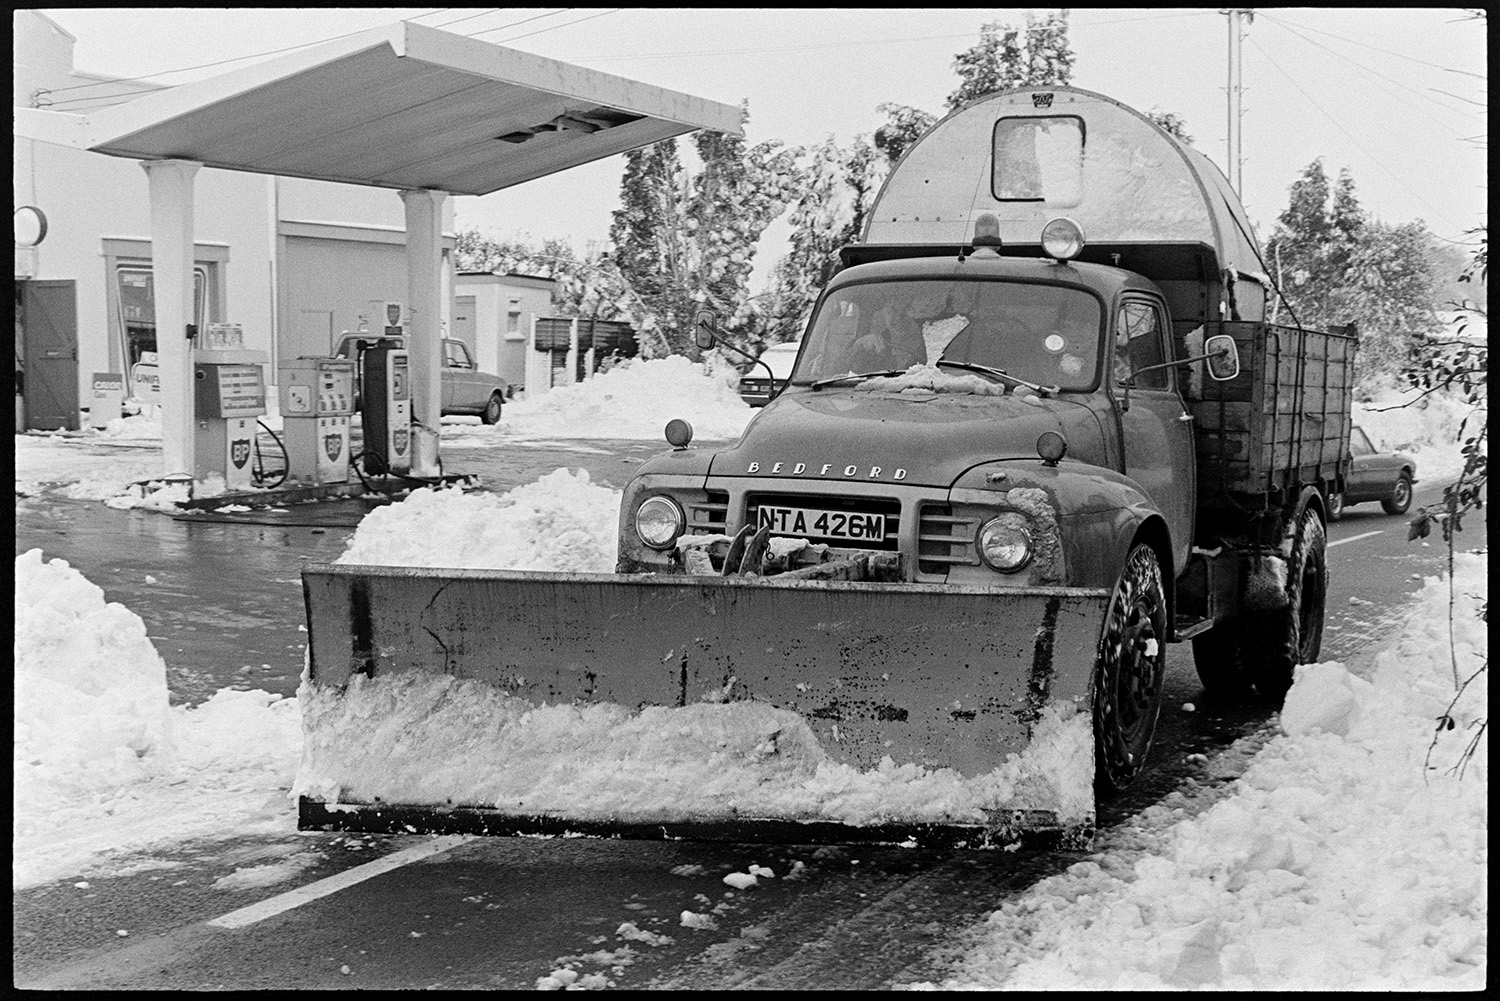 Snow plough going through village. 
[A snow plough passing  garage in Beaford. Mounds of snow can be seen on the side of the road and petrol pumps are visible in the garage.]